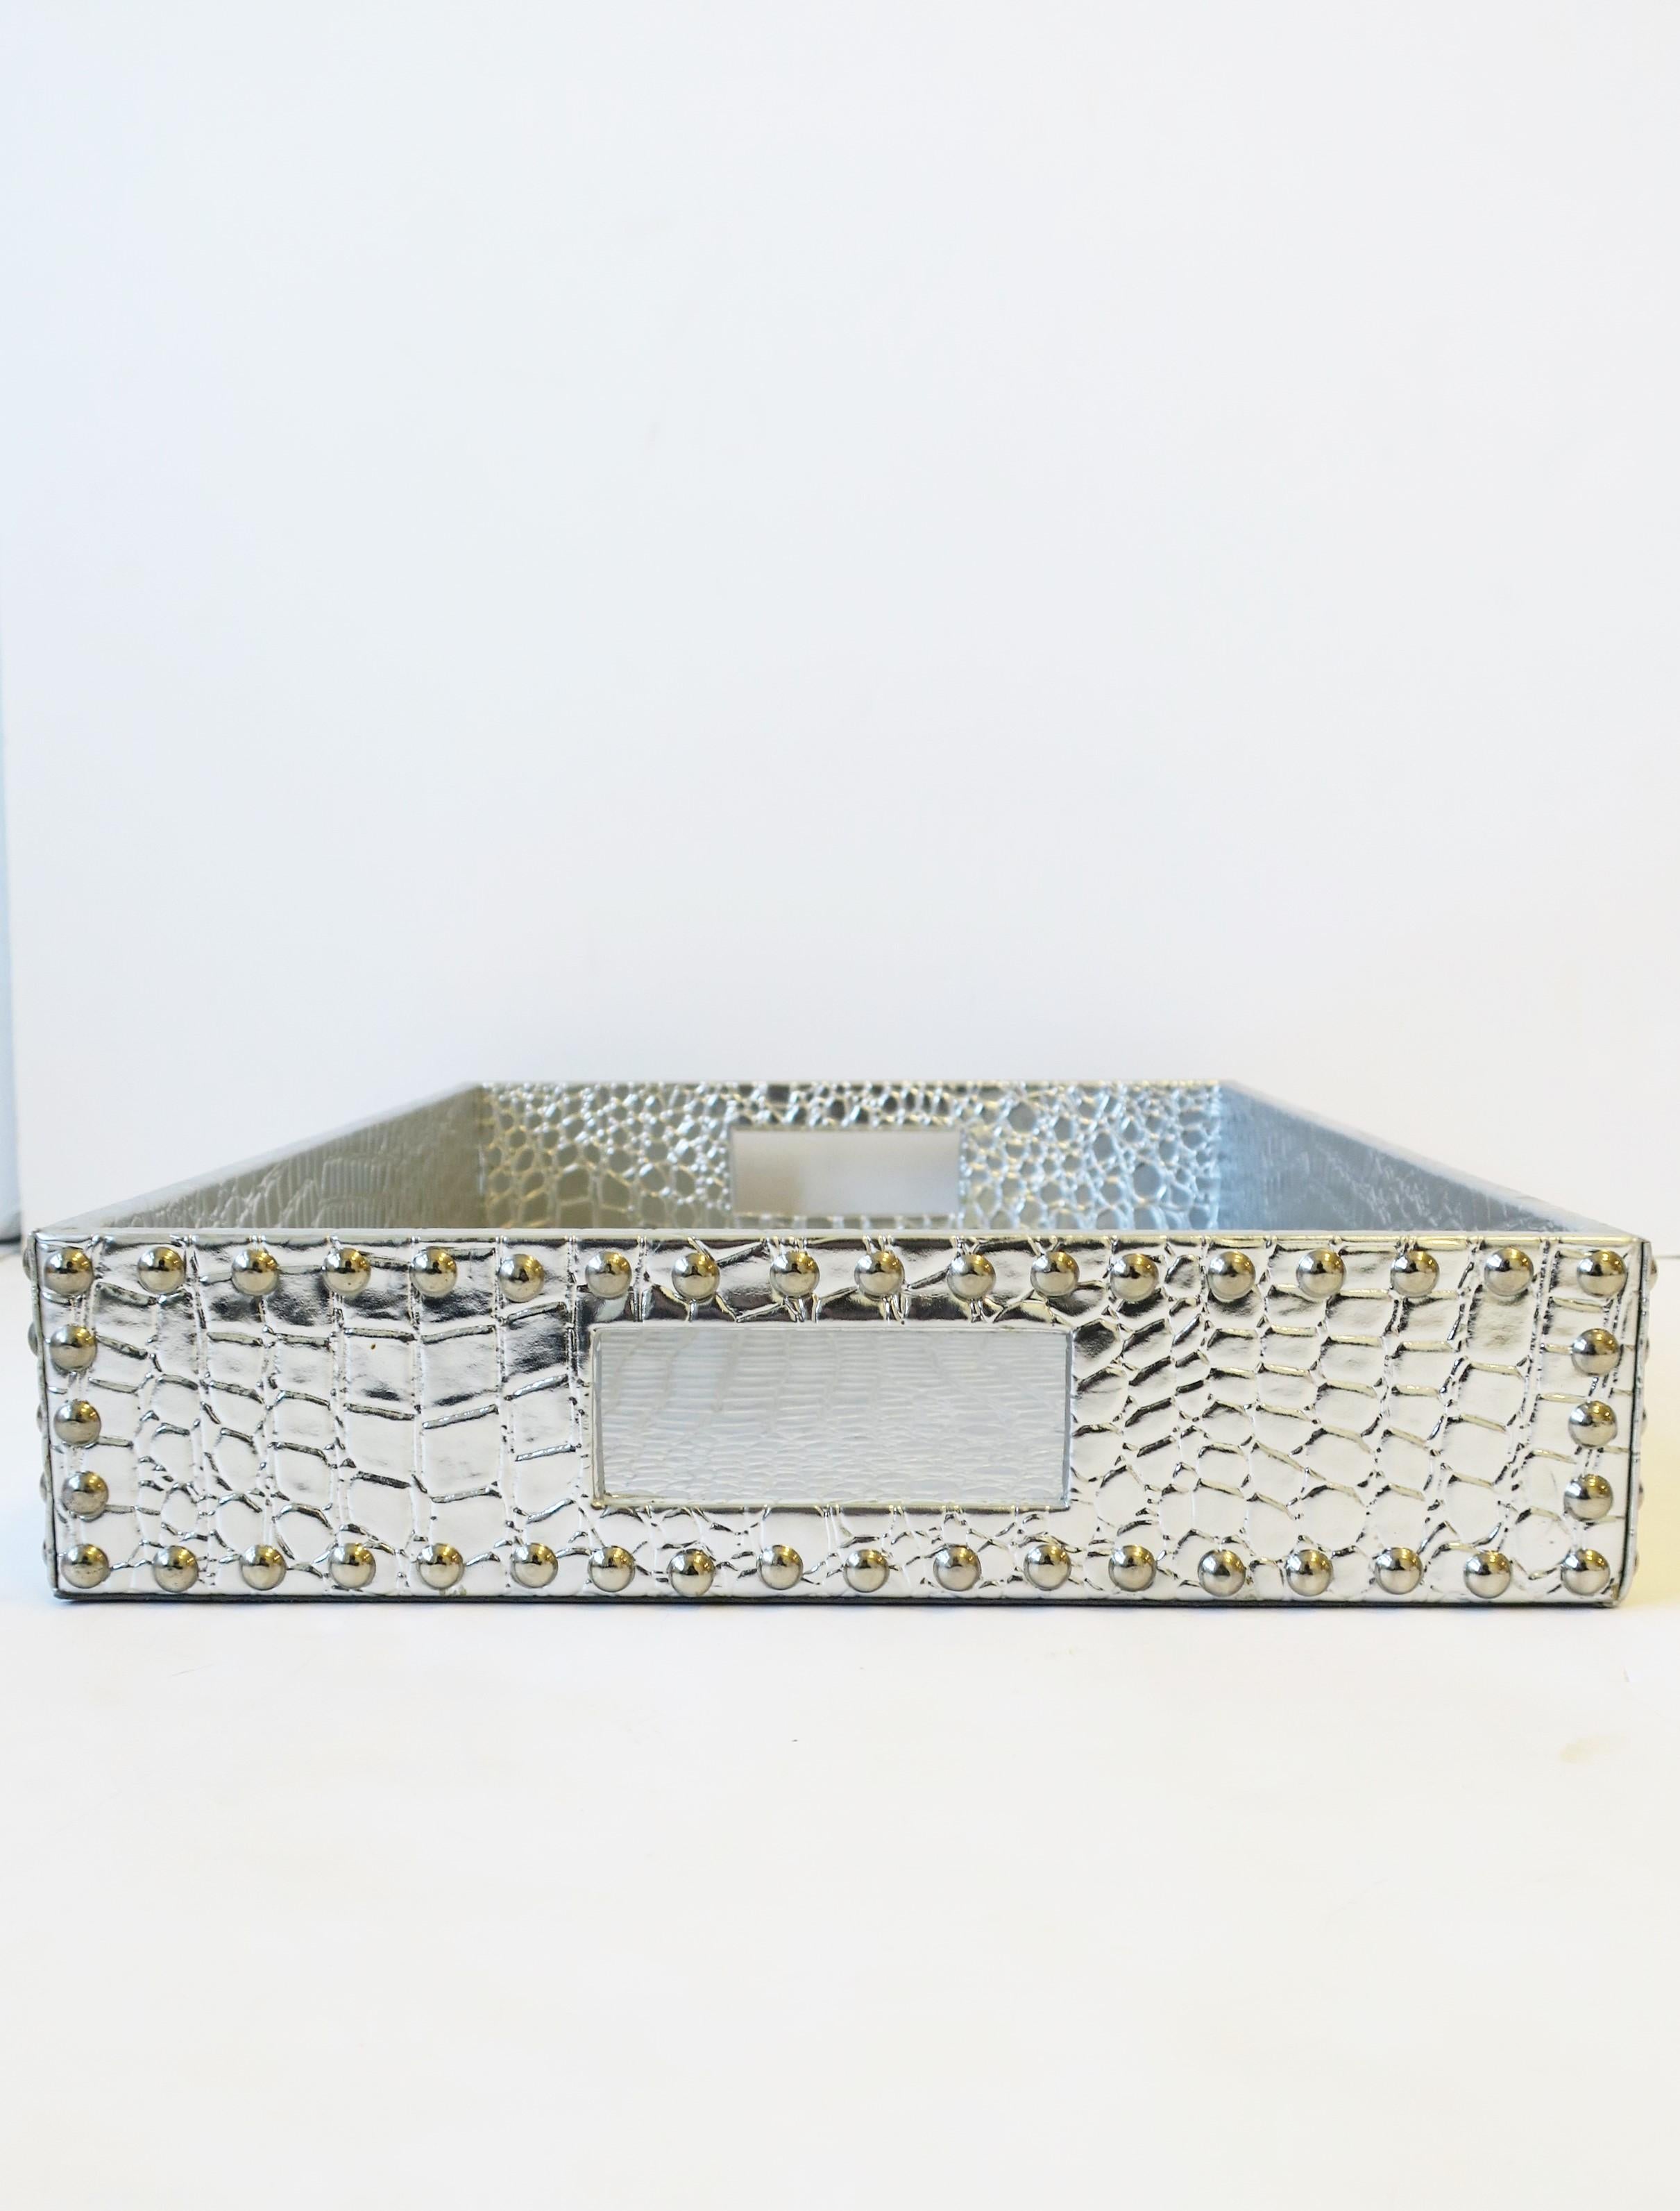 Crocodile Alligator Style Serving or Storage Tray with Nailhead Design 6